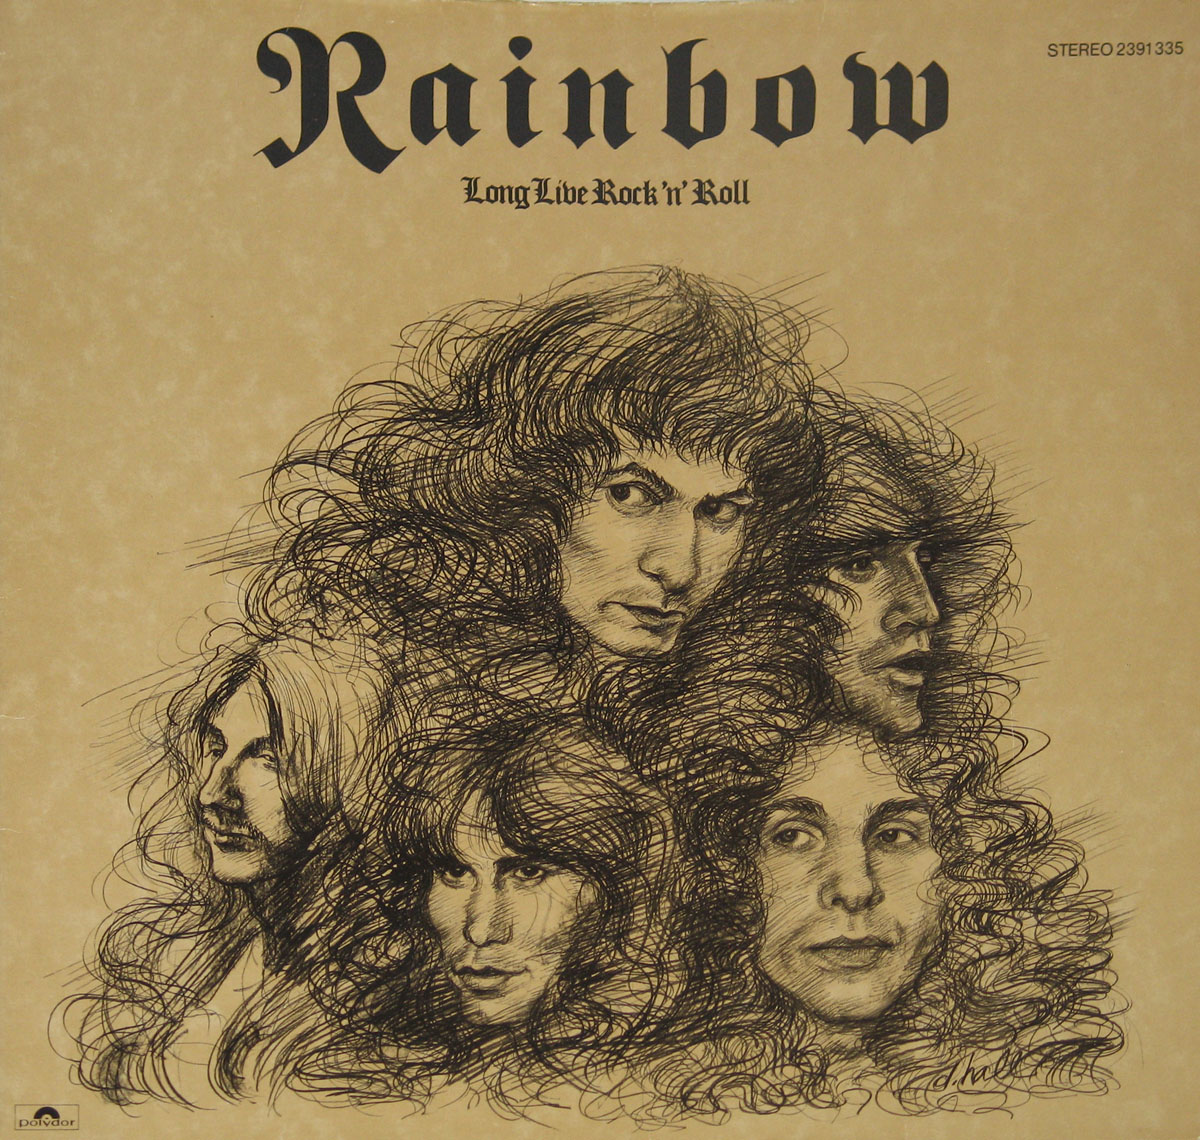 High Resolution Photos of rainbow long live rock roll germany 